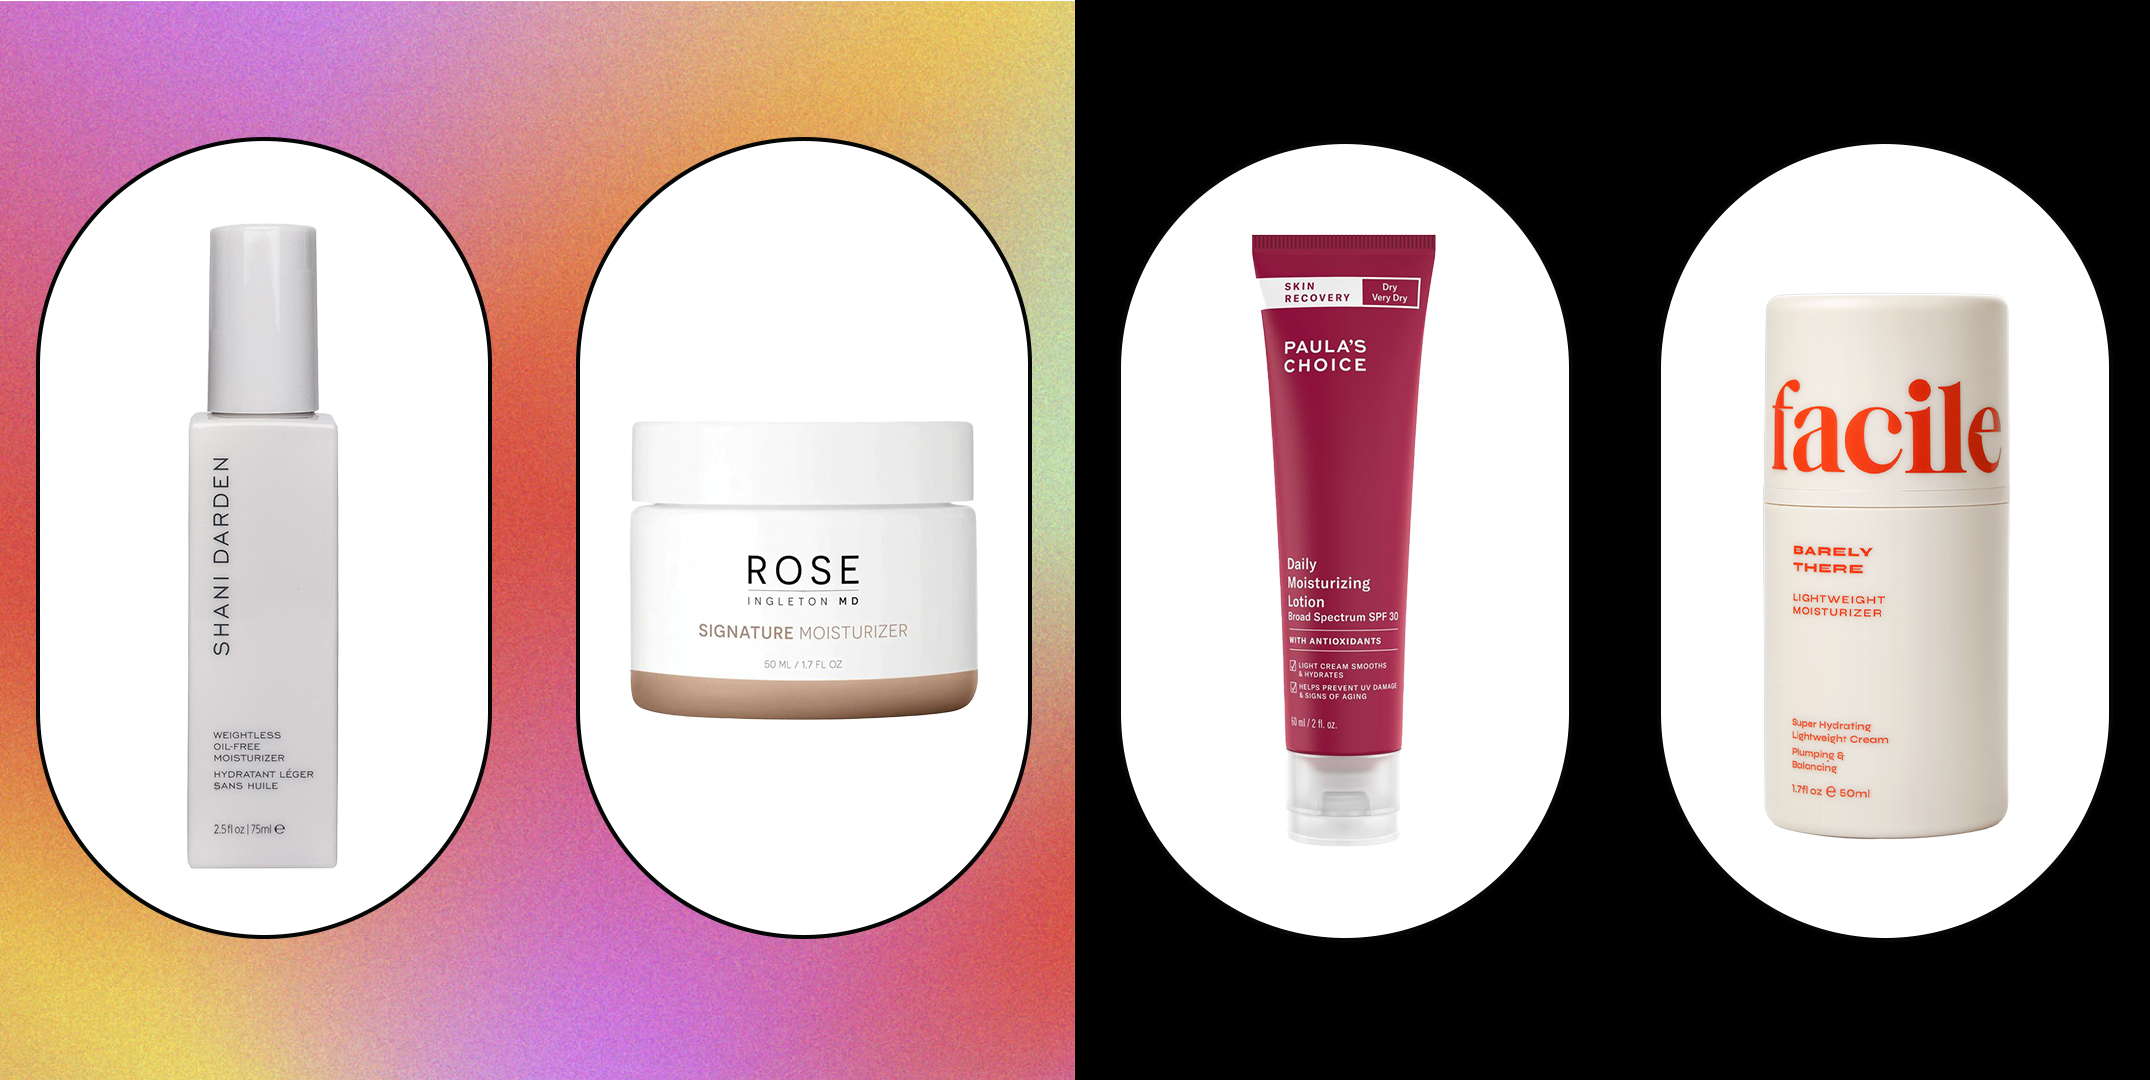 21 Best Face Moisturizers and Creams for All Skin Types in 2022